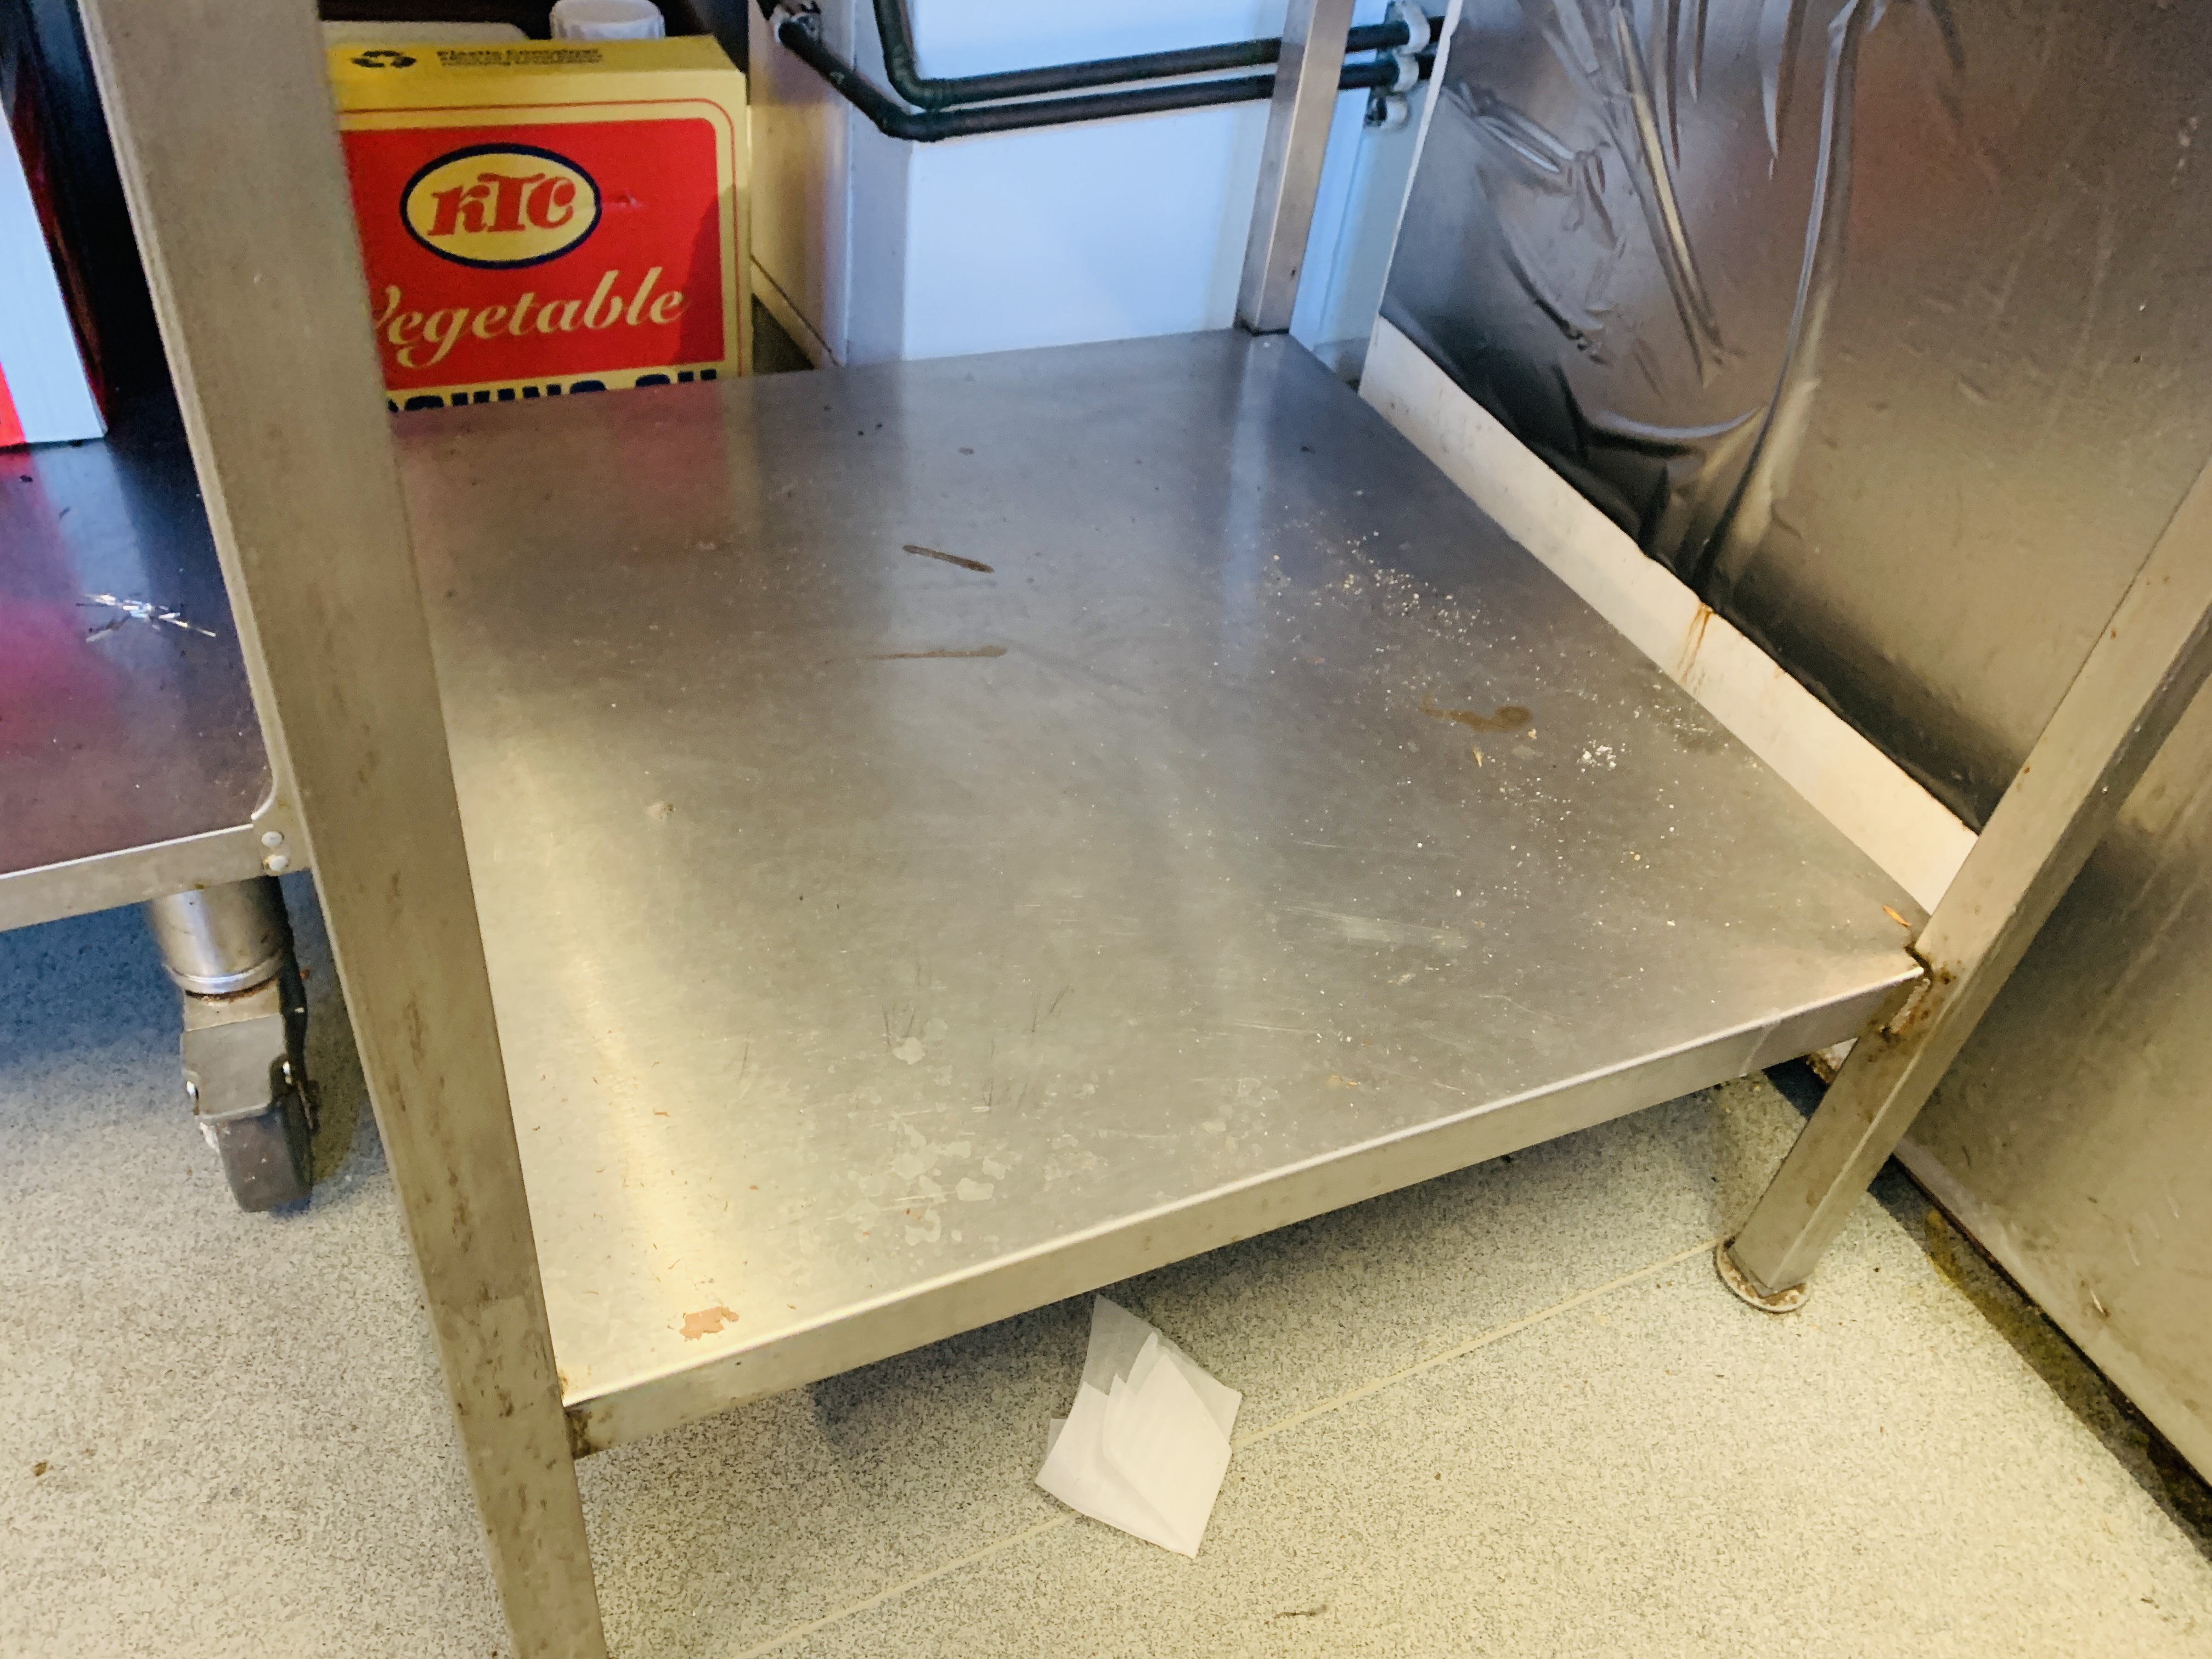 2 X STAINLESS STEEL TWO TIER CORNER CATERING PREPARATION TABLE - W 70CM. D 70CM. - Image 6 of 6